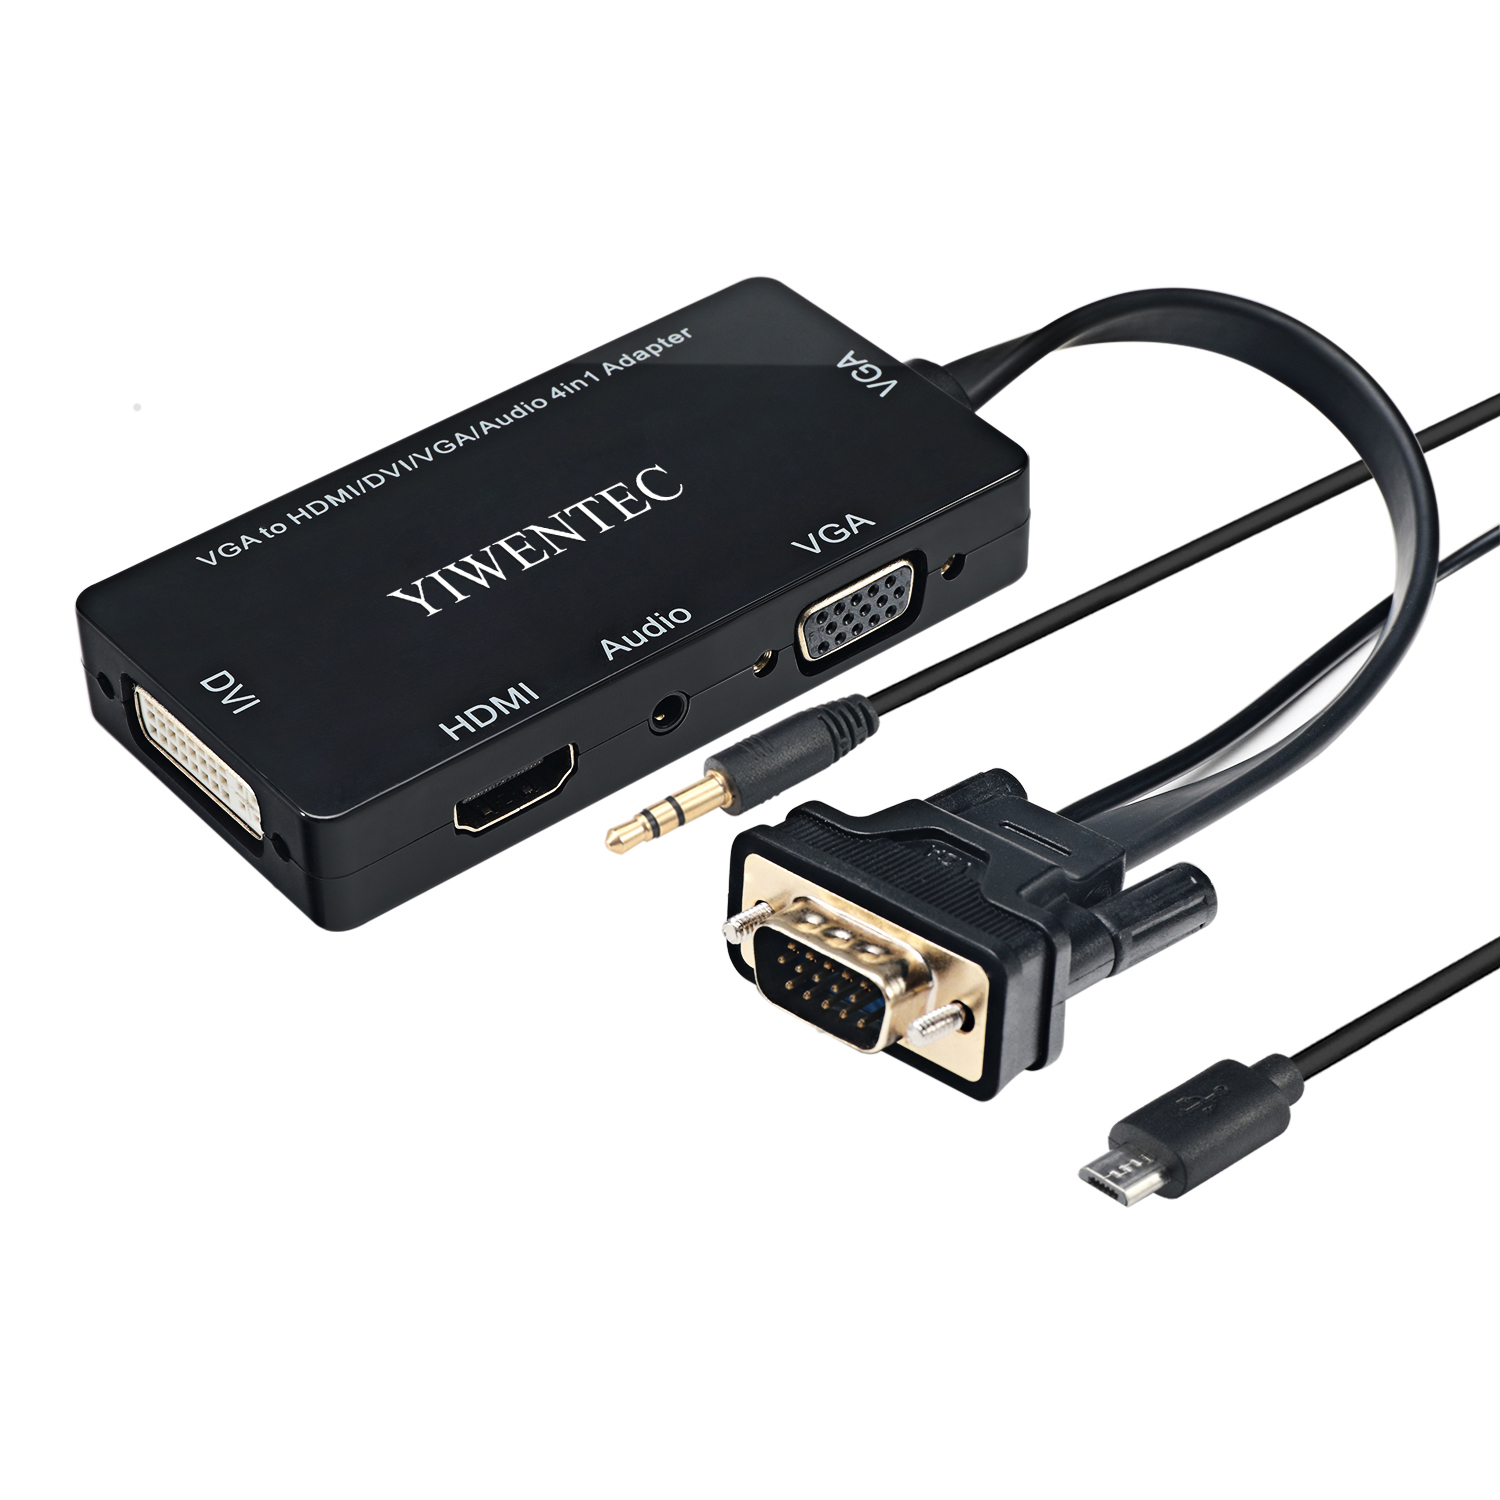 sol visdom hybrid YIWENTEC VGA Male to VGA HDMI DVI Female 3IN1 Adapter Converter for Desktop  Laptop VGA Graphics Card with Micro USB Power Cable and Audio 3.5mm Jack  Connect simultaneously E0409-HDMI To HDMI VGA